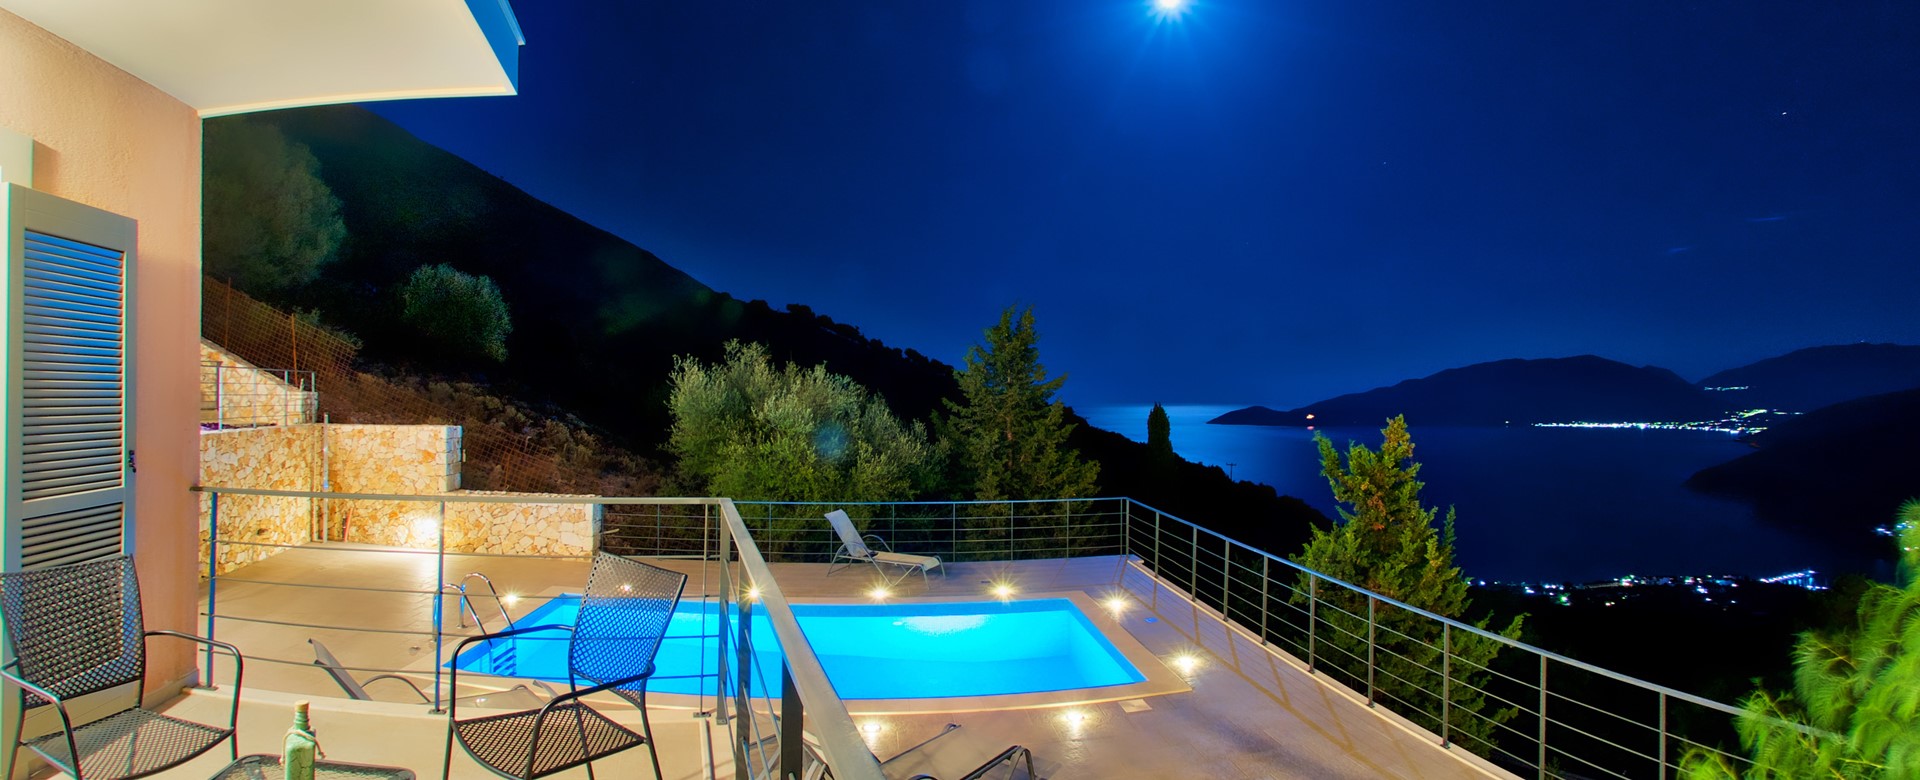 The moonlit view is just as spectacular from Villa Amore, Agia Efimia, Kefalonia, Greek Islands